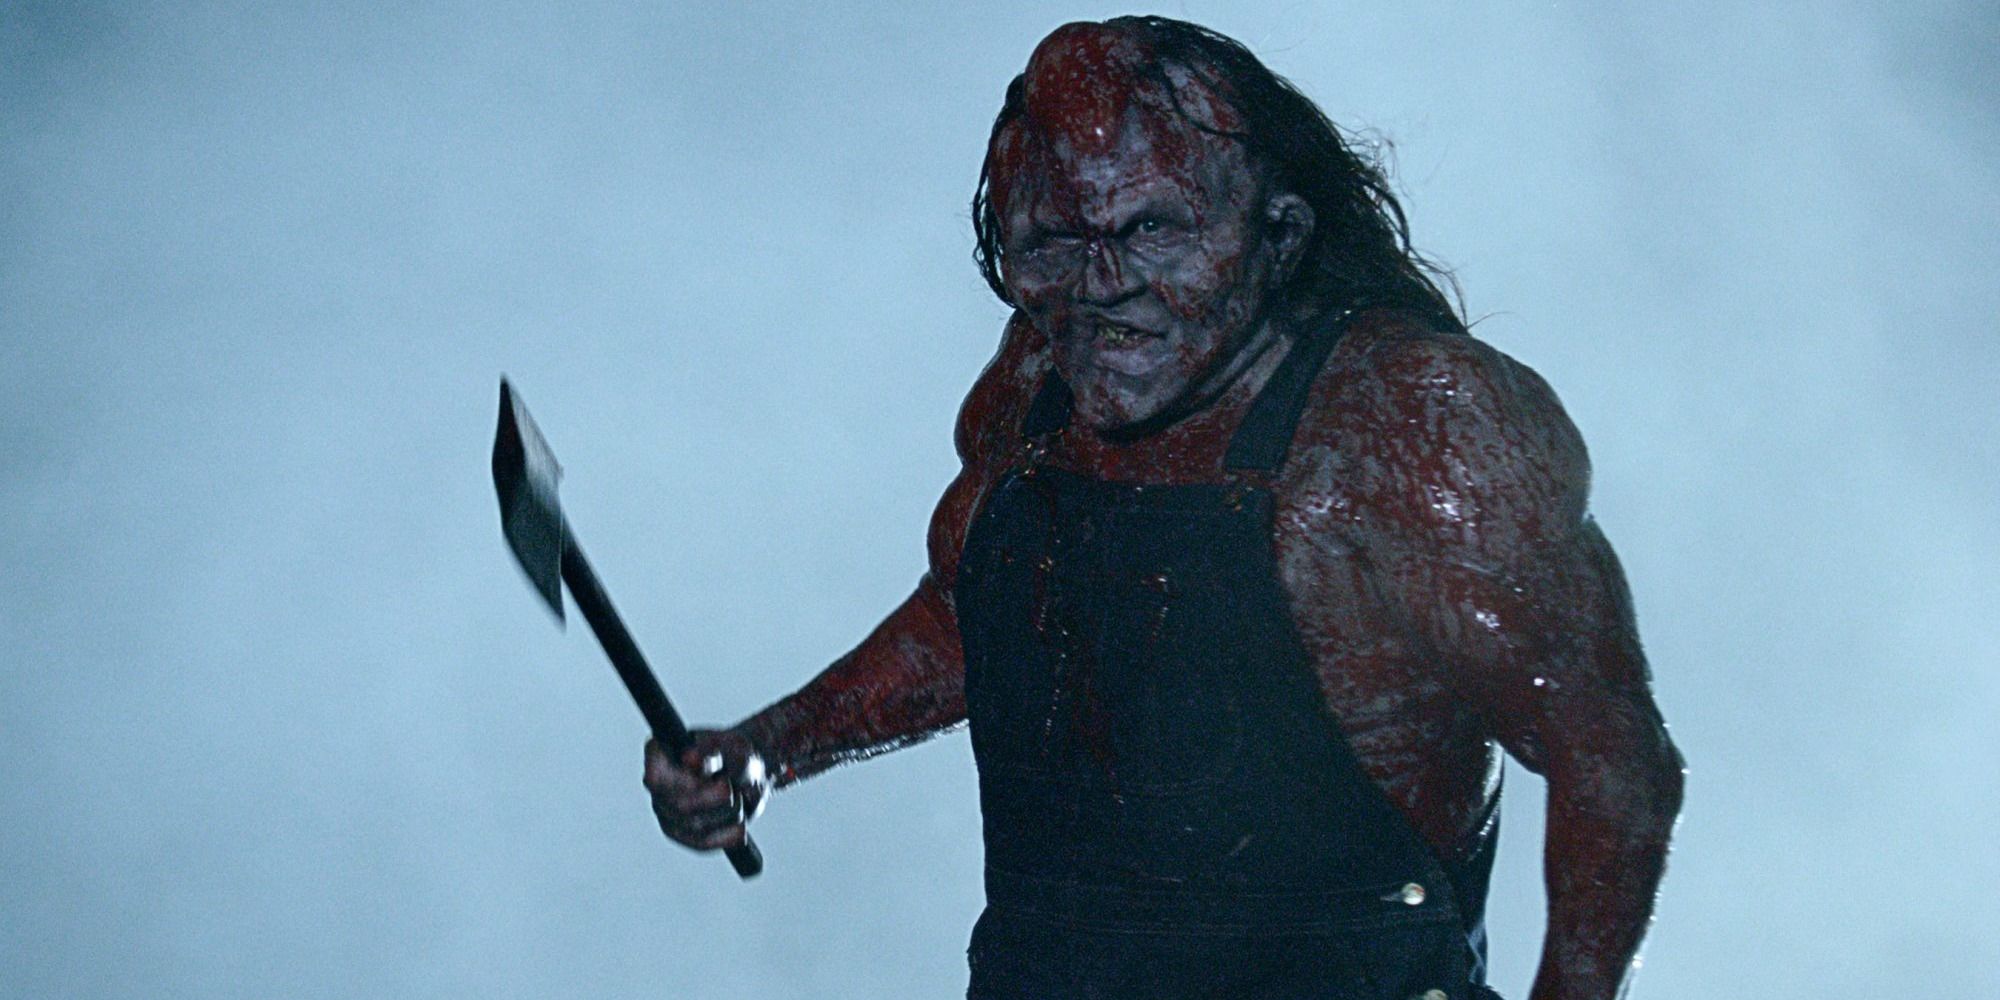 Kane Hodder as Victor Crowley in 'Hatchet', bloodied and holding a hatchet